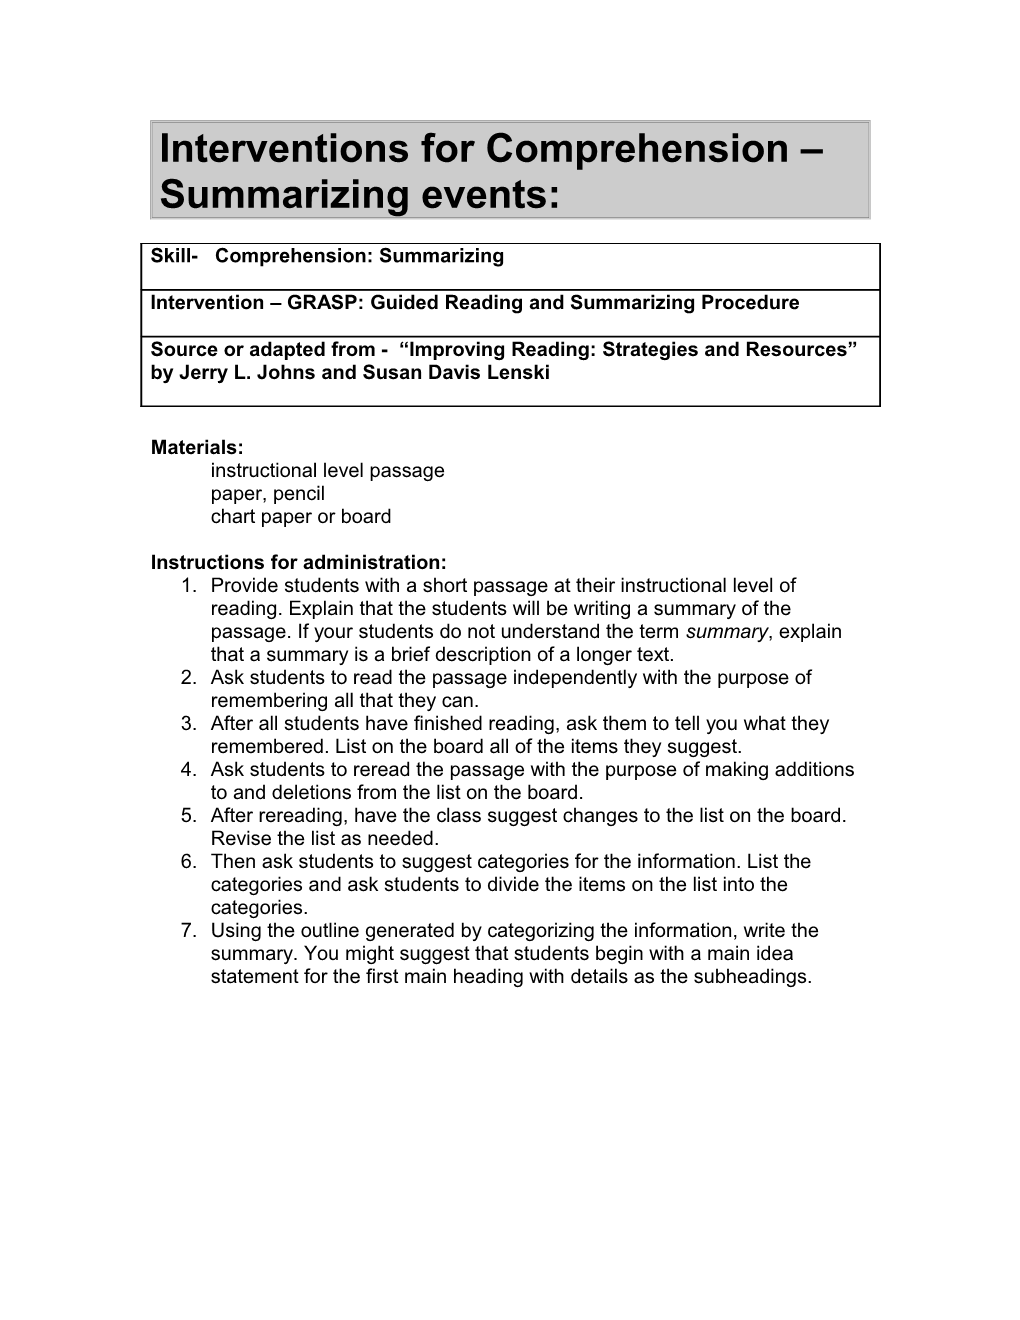 Interventions for Comprehension Summarizing Events